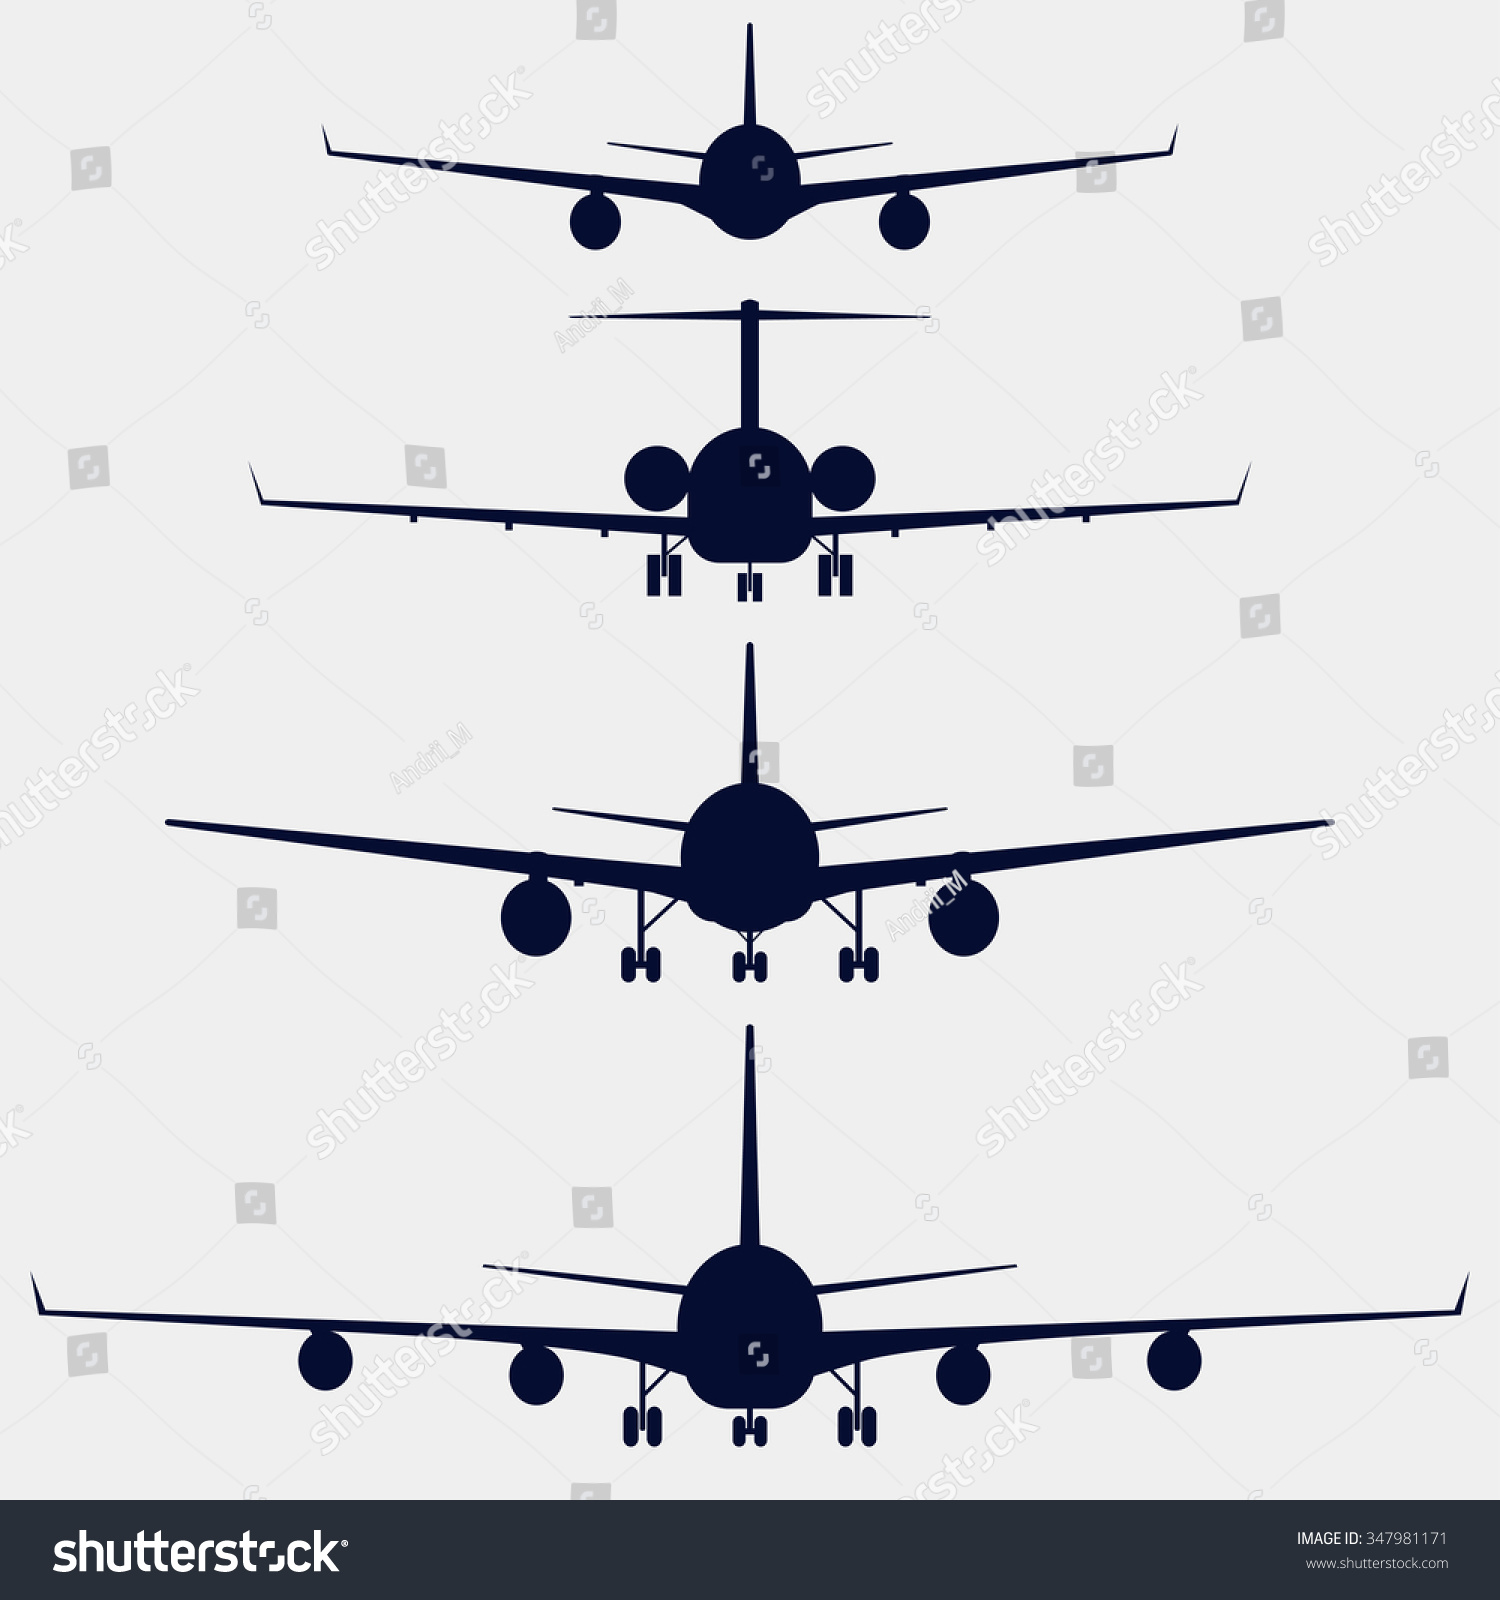 airplane clipart front view - photo #19